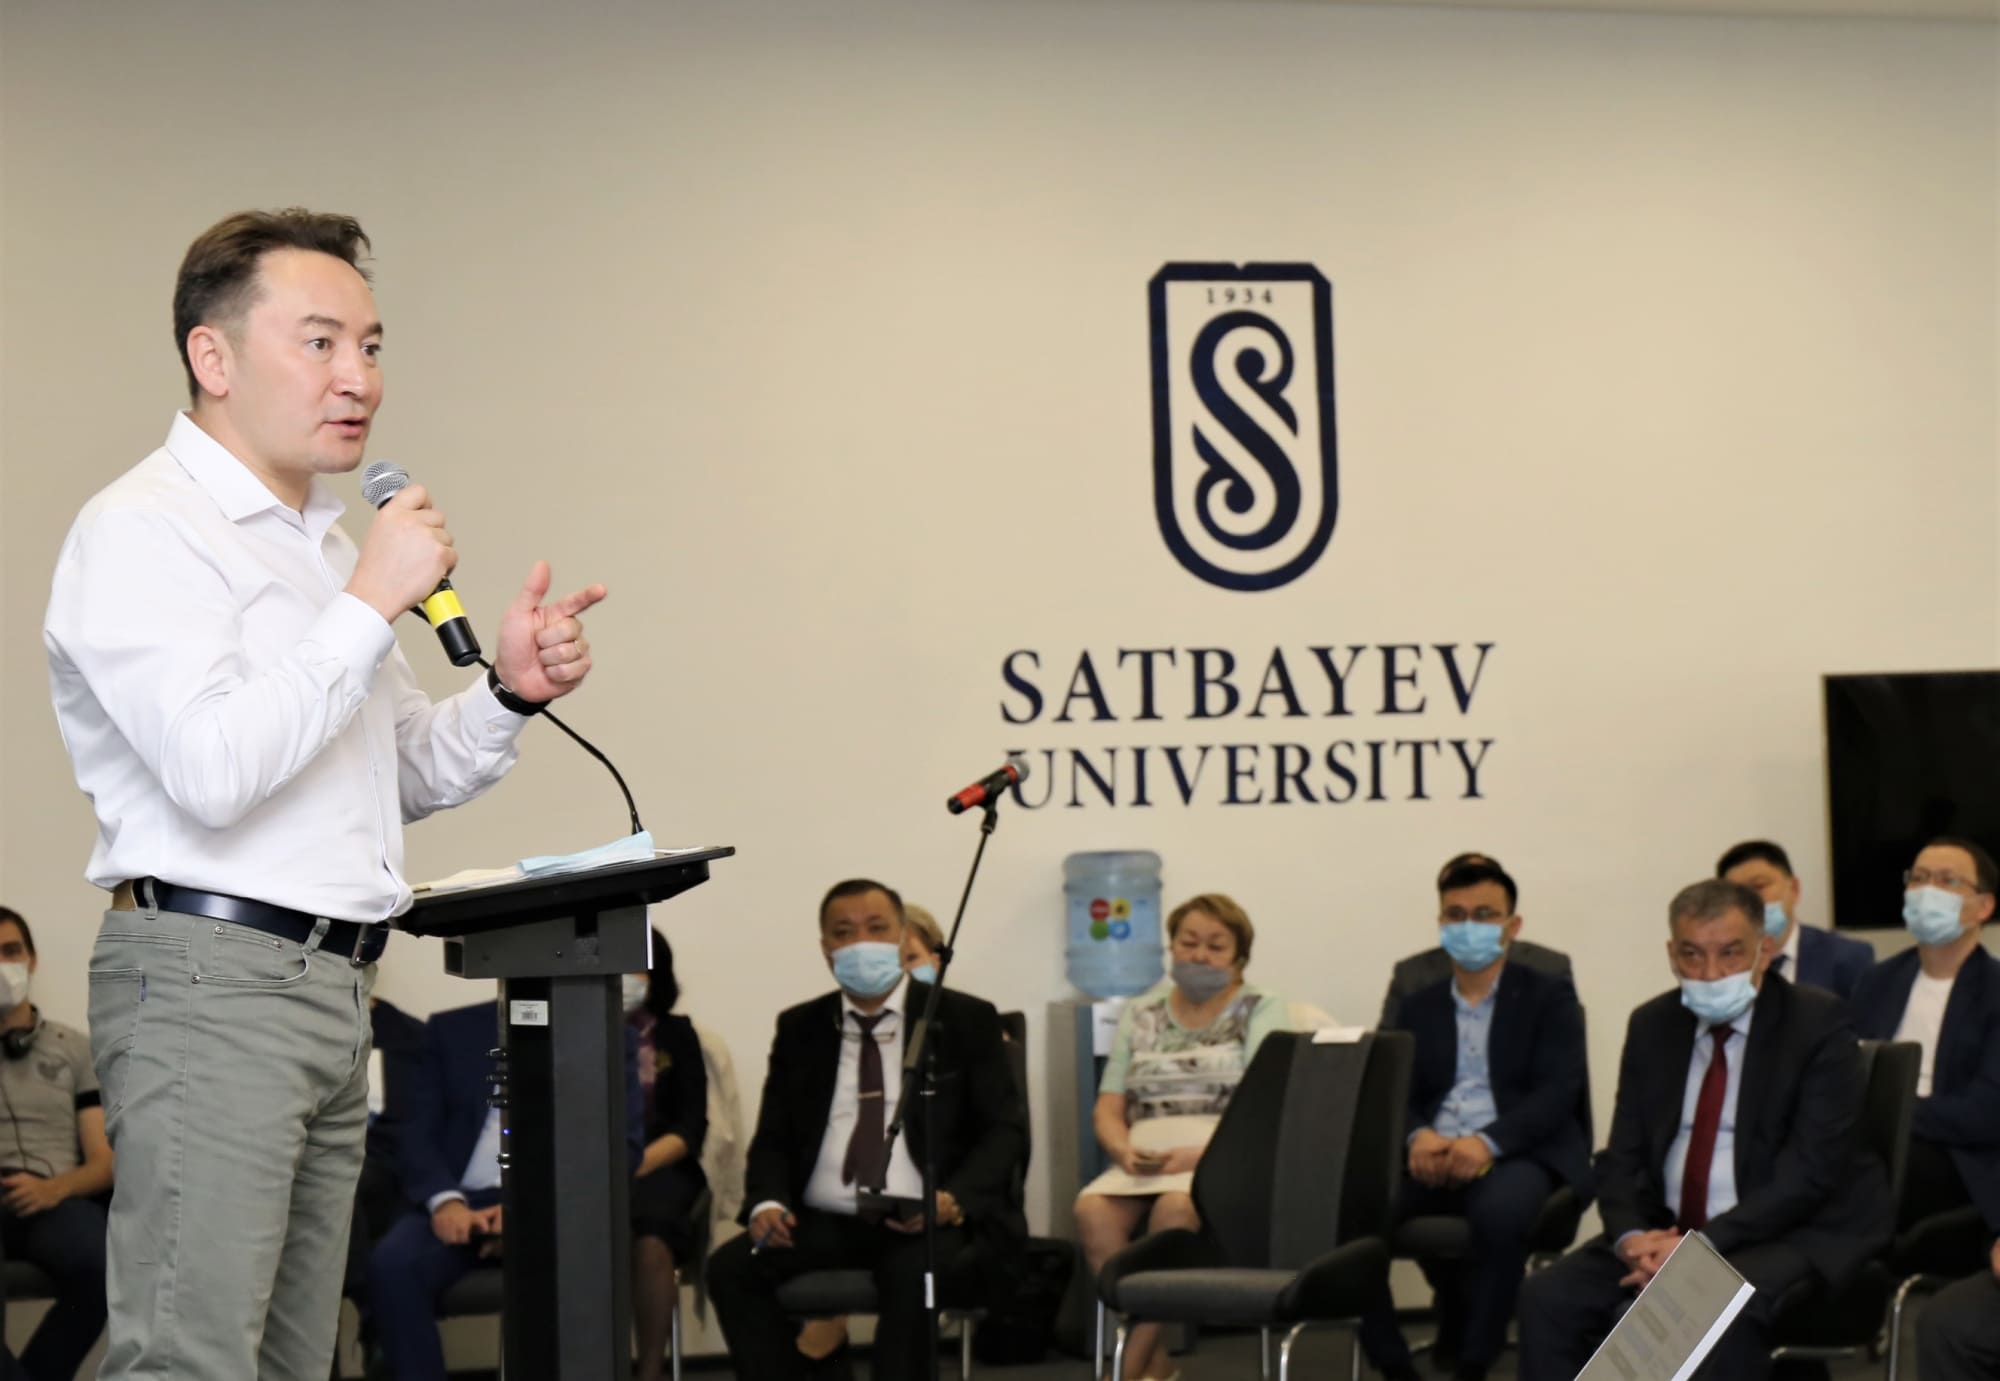 The Rector of Satbayev University presented a new strategy for the development of the university